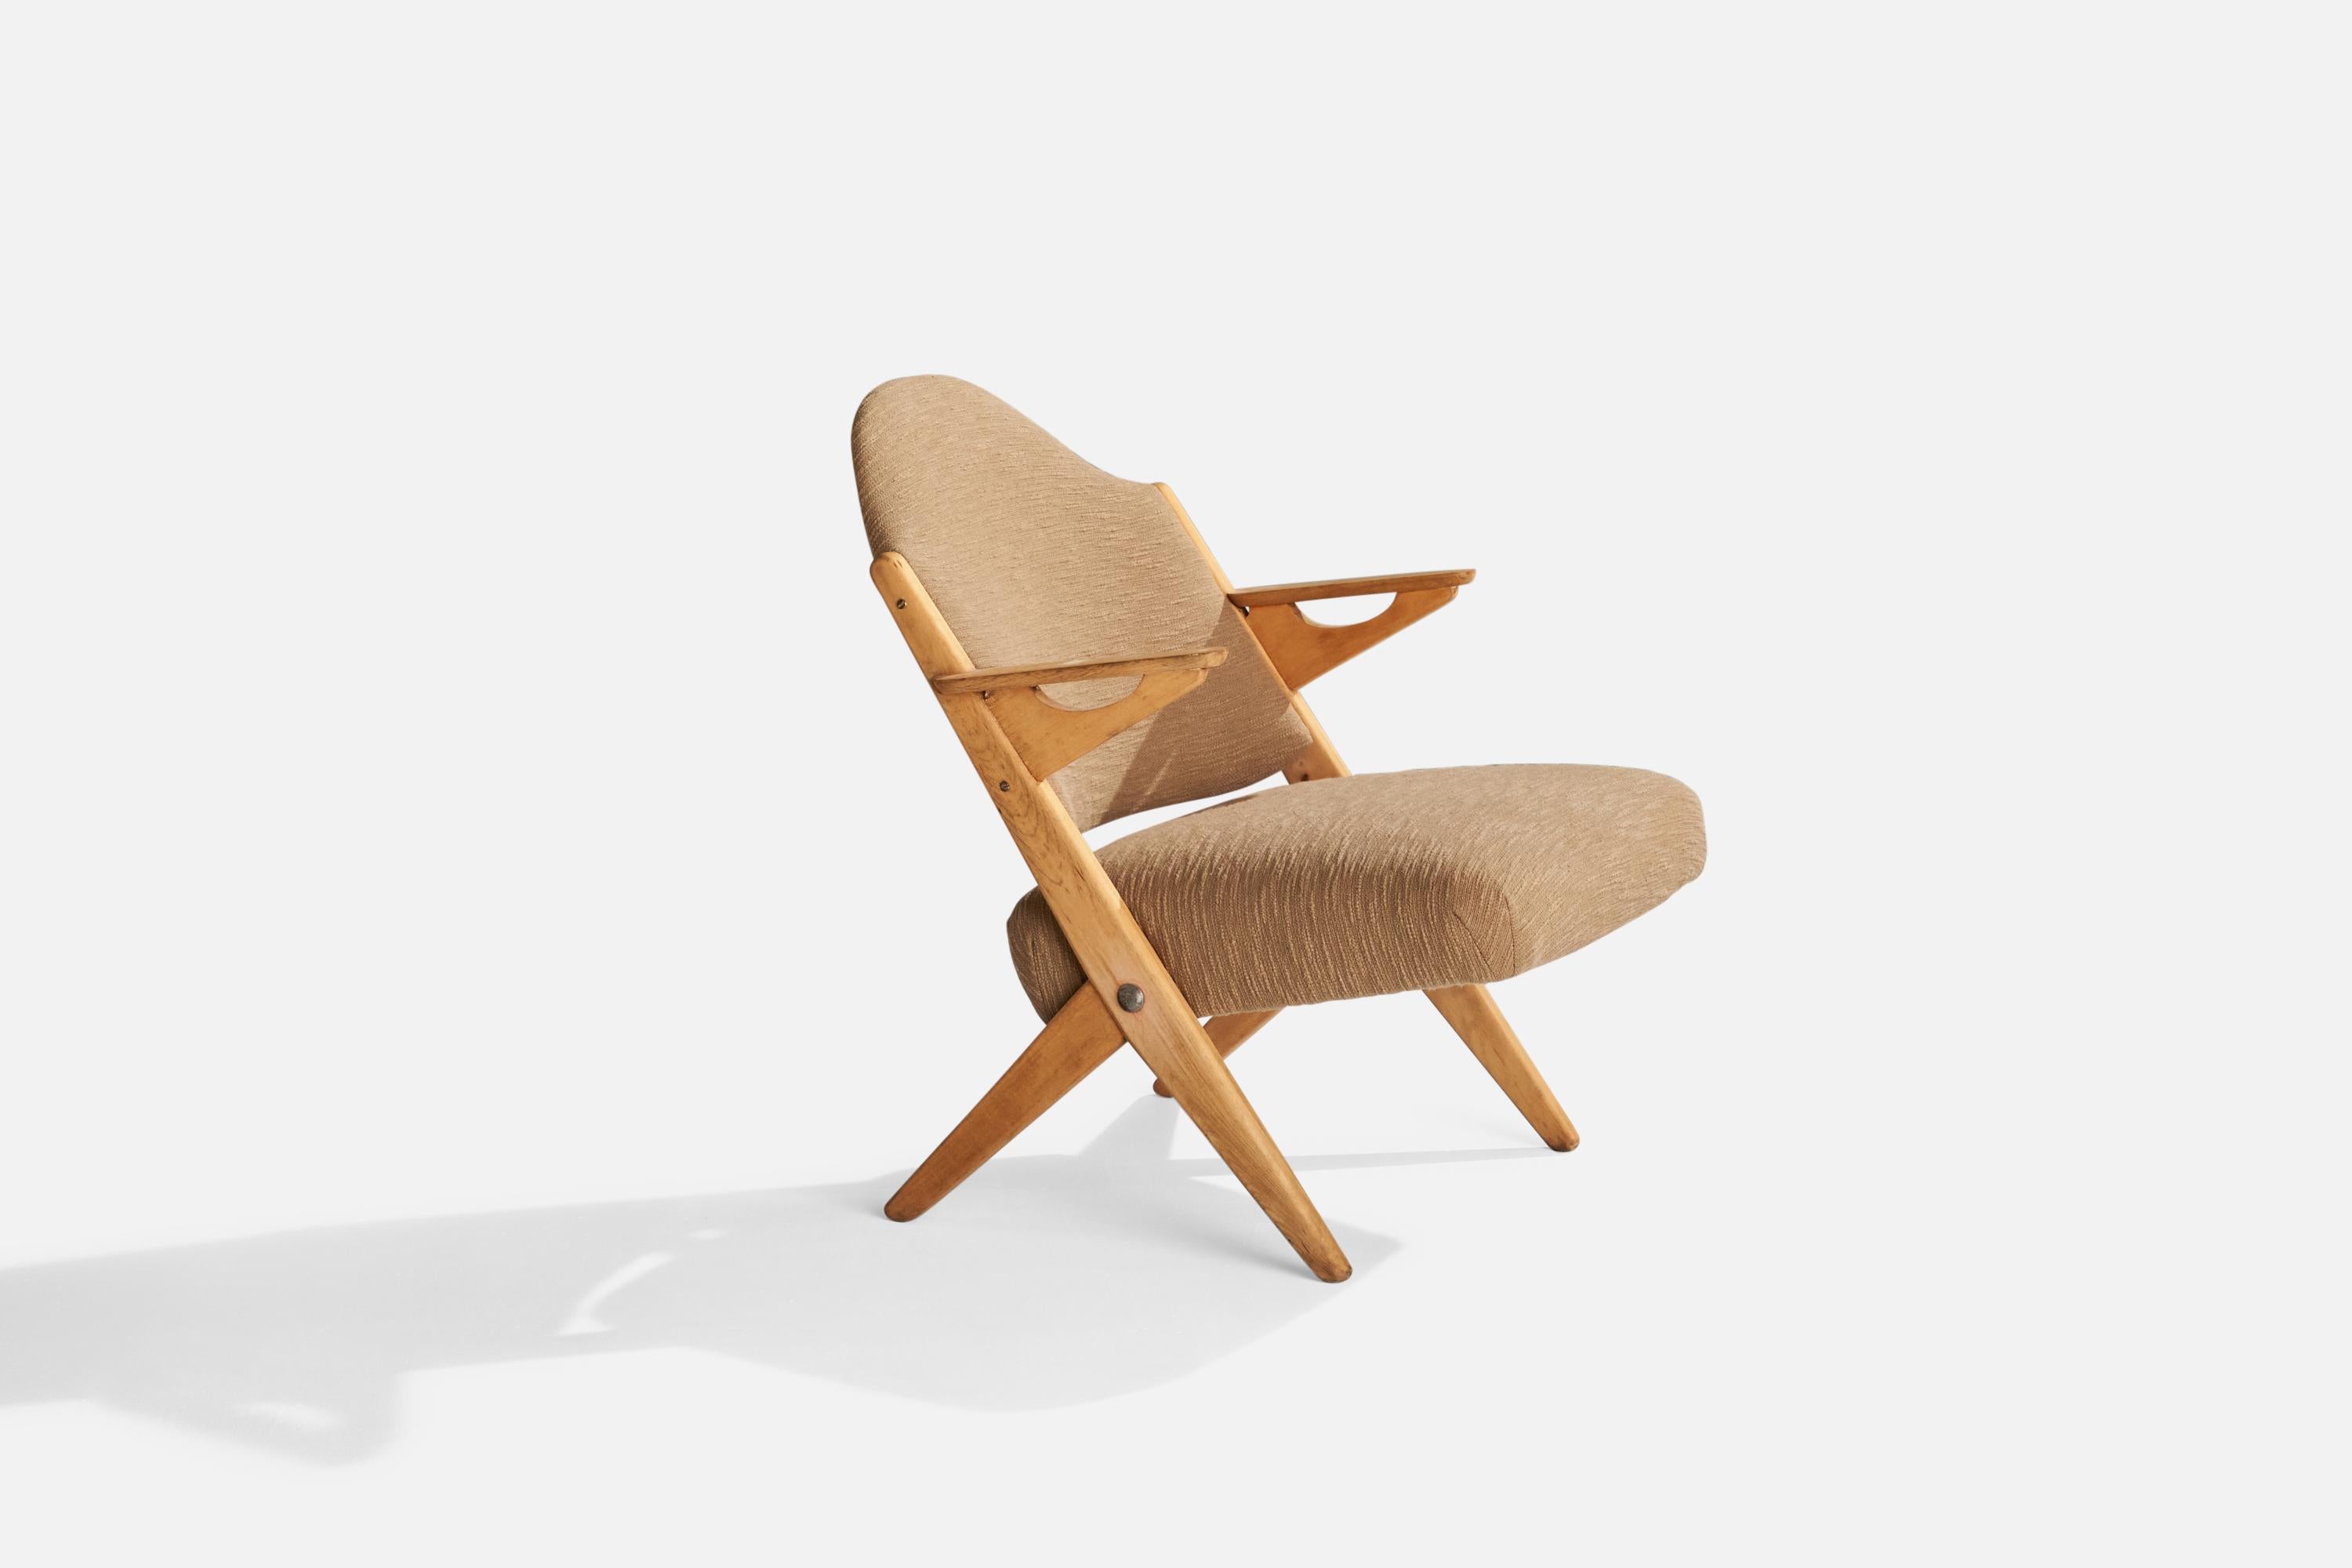 A beech and beige fabric lounge chair designed by Arne Hovmand-Olsen and produced by Komfort Randers, Denmark, 1950s.

Seat height 16”.